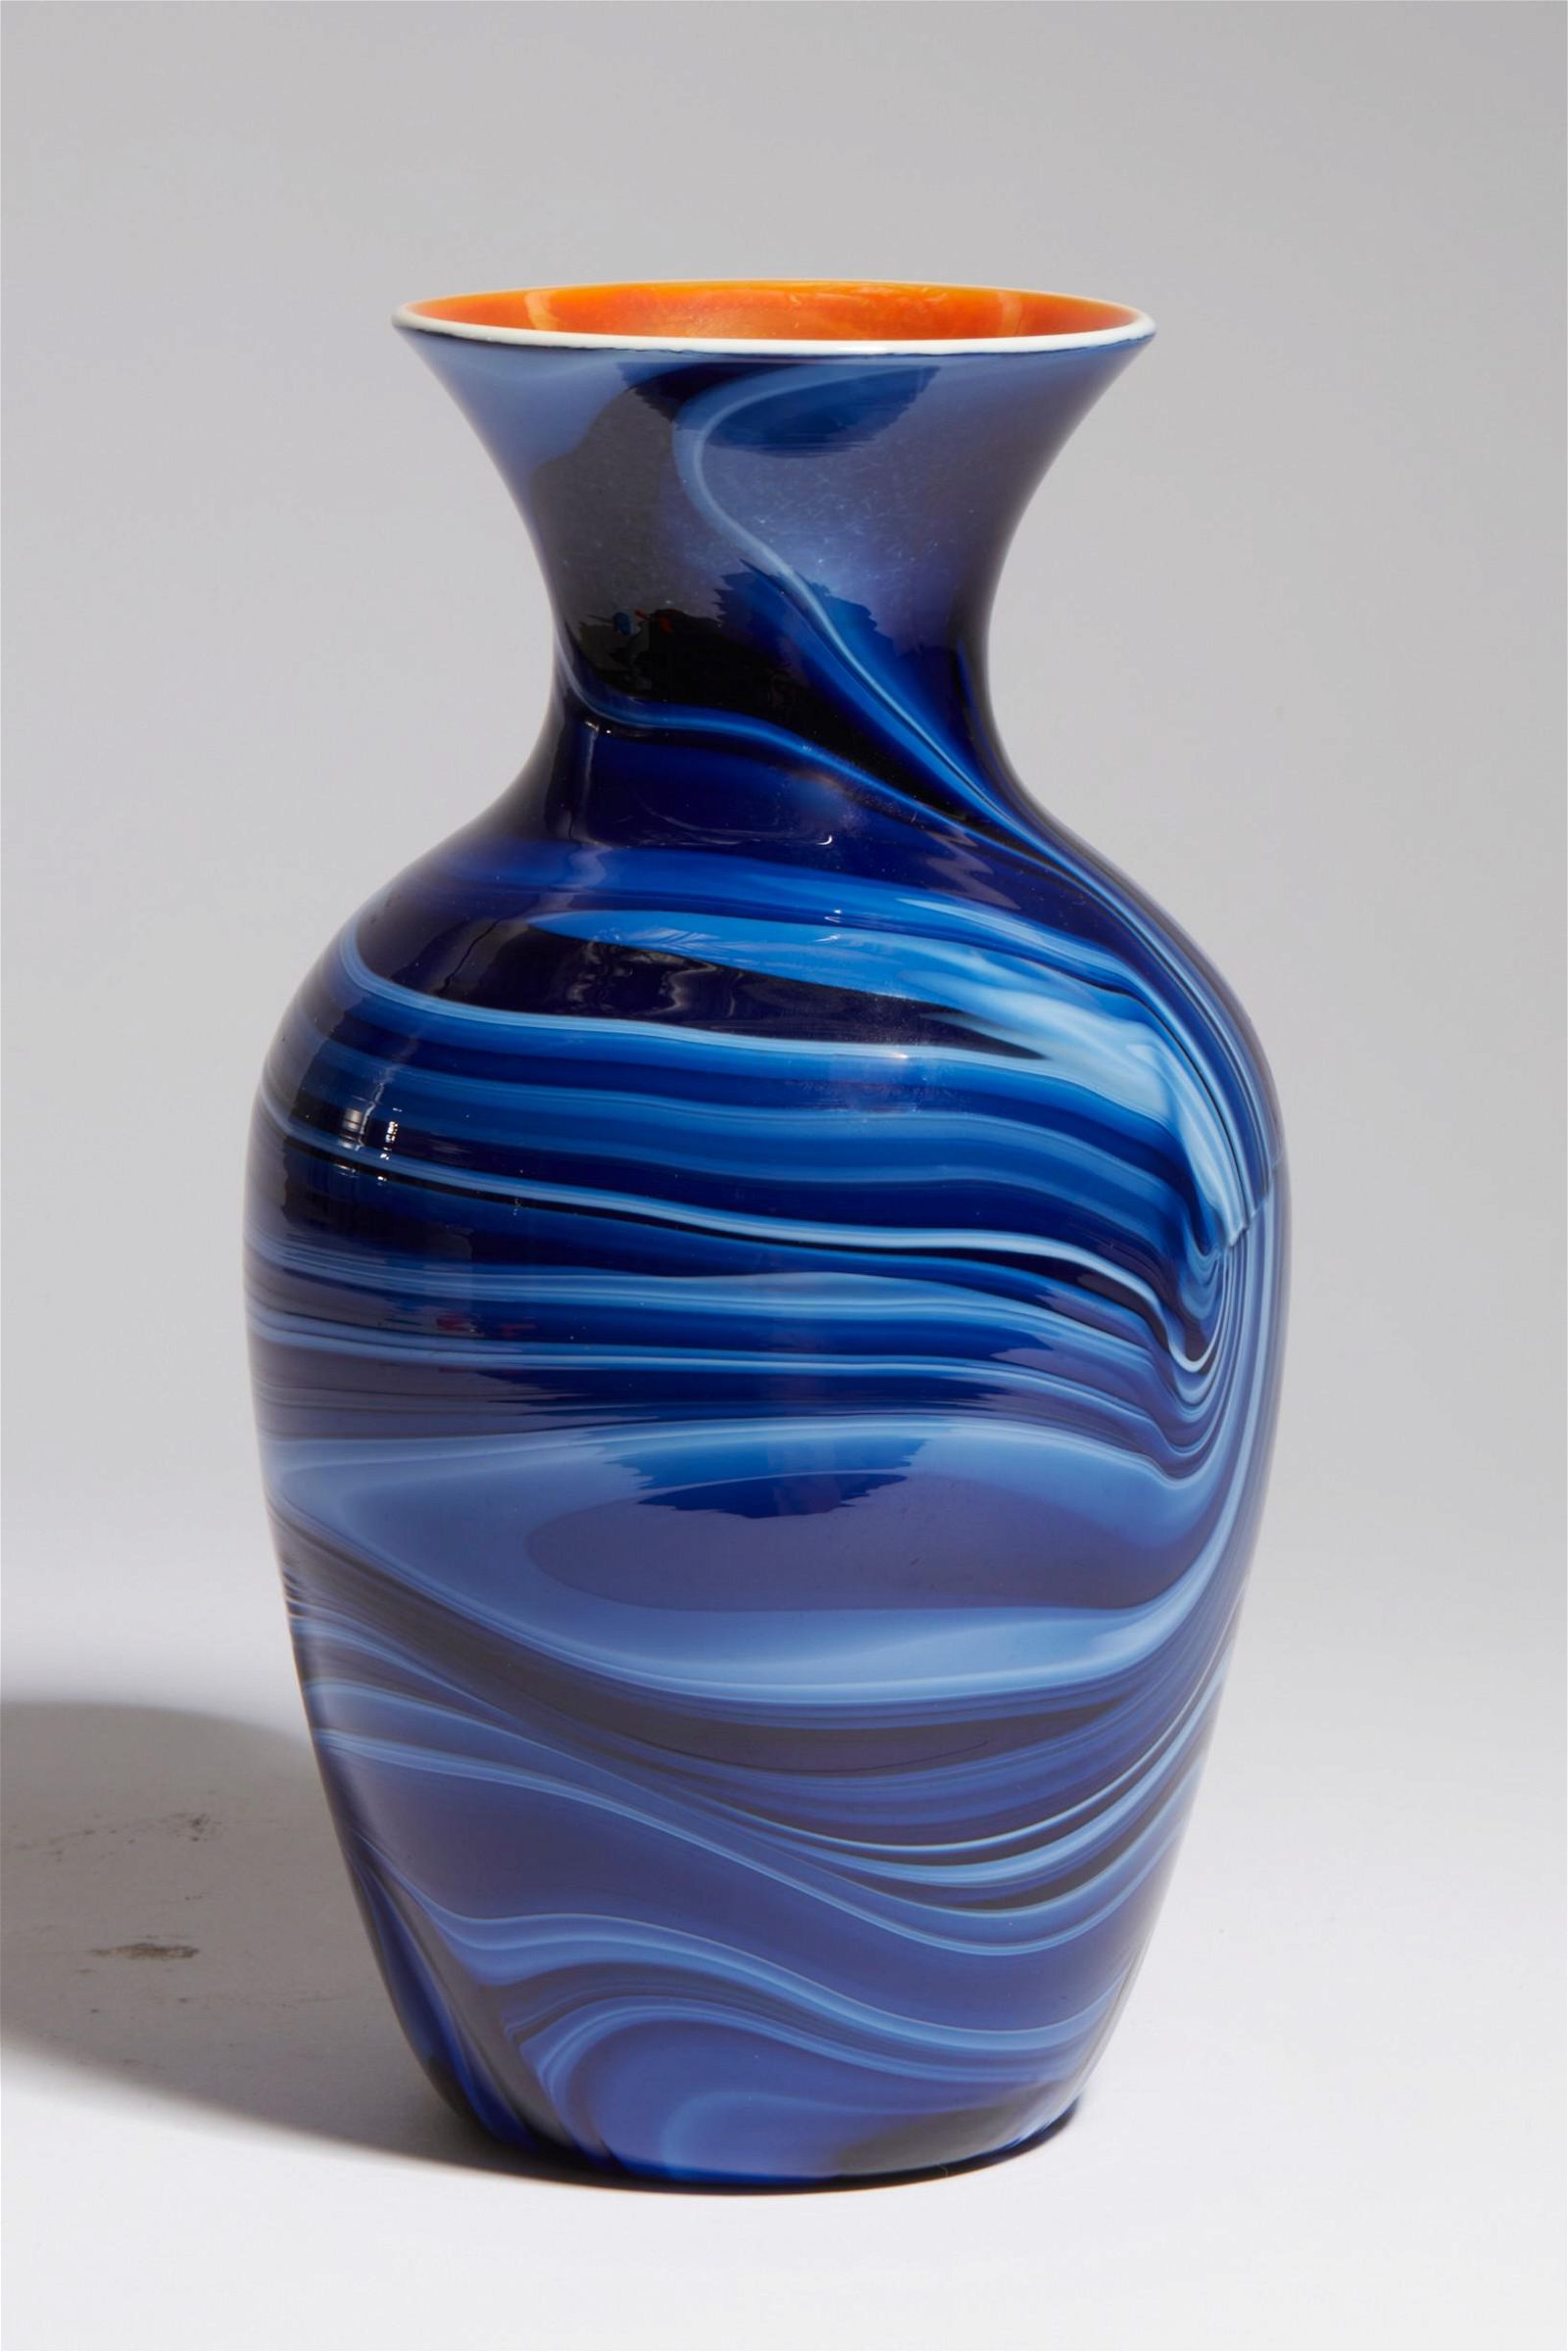 AN IMPERIAL GLASS COMPANY ART GLASS